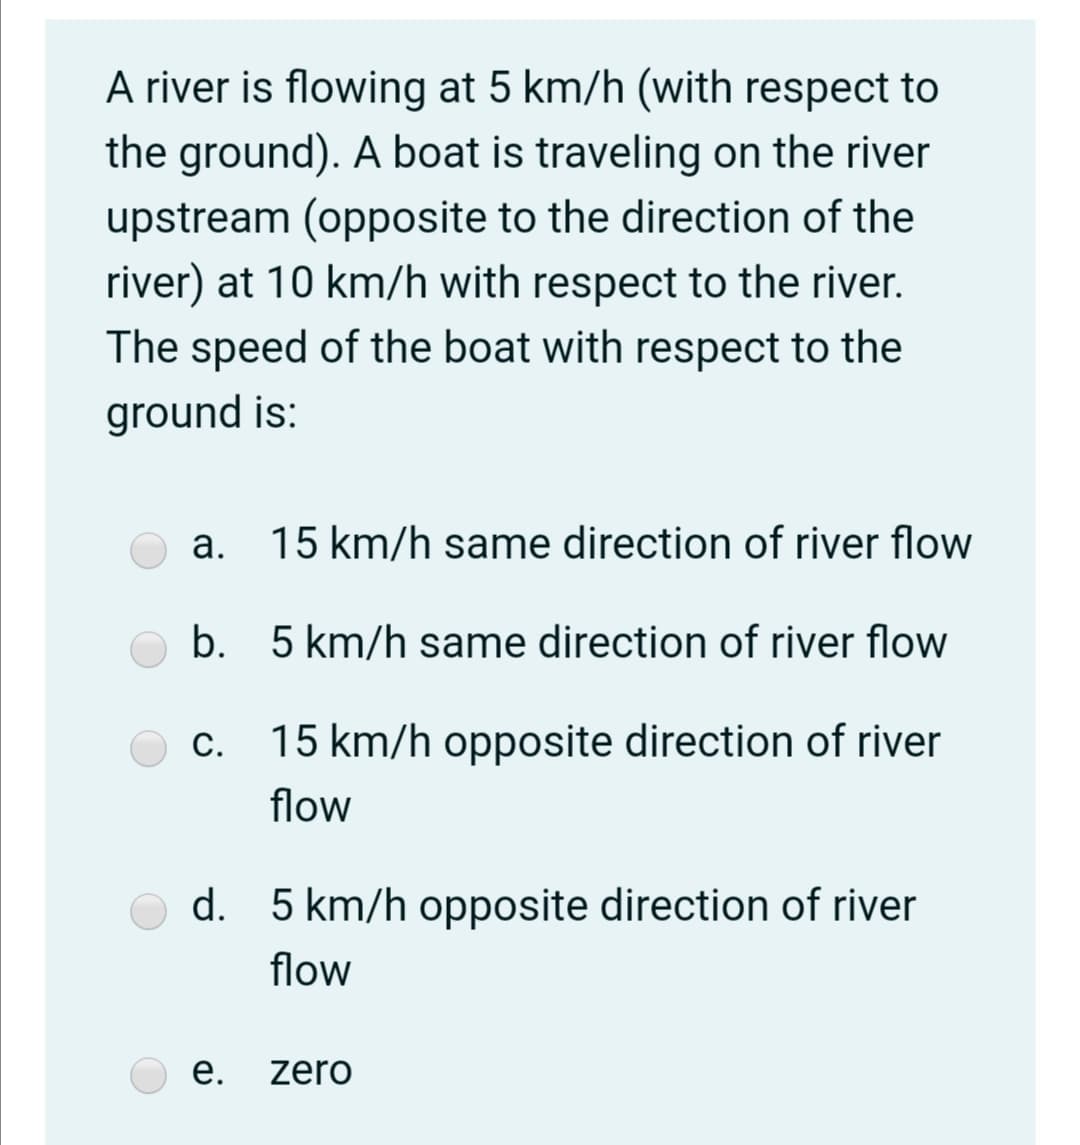 A river is flowing at 5 km/h (with respect to
the ground). A boat is traveling on the river
upstream (opposite to the direction of the
river) at 10 km/h with respect to the river.
The speed of the boat with respect to the
ground is:
а.
15 km/h same direction of river flow
b. 5 km/h same direction of river flow
c. 15 km/h opposite direction of river
С.
flow
d.
5 km/h opposite direction of river
flow
е.
zero
